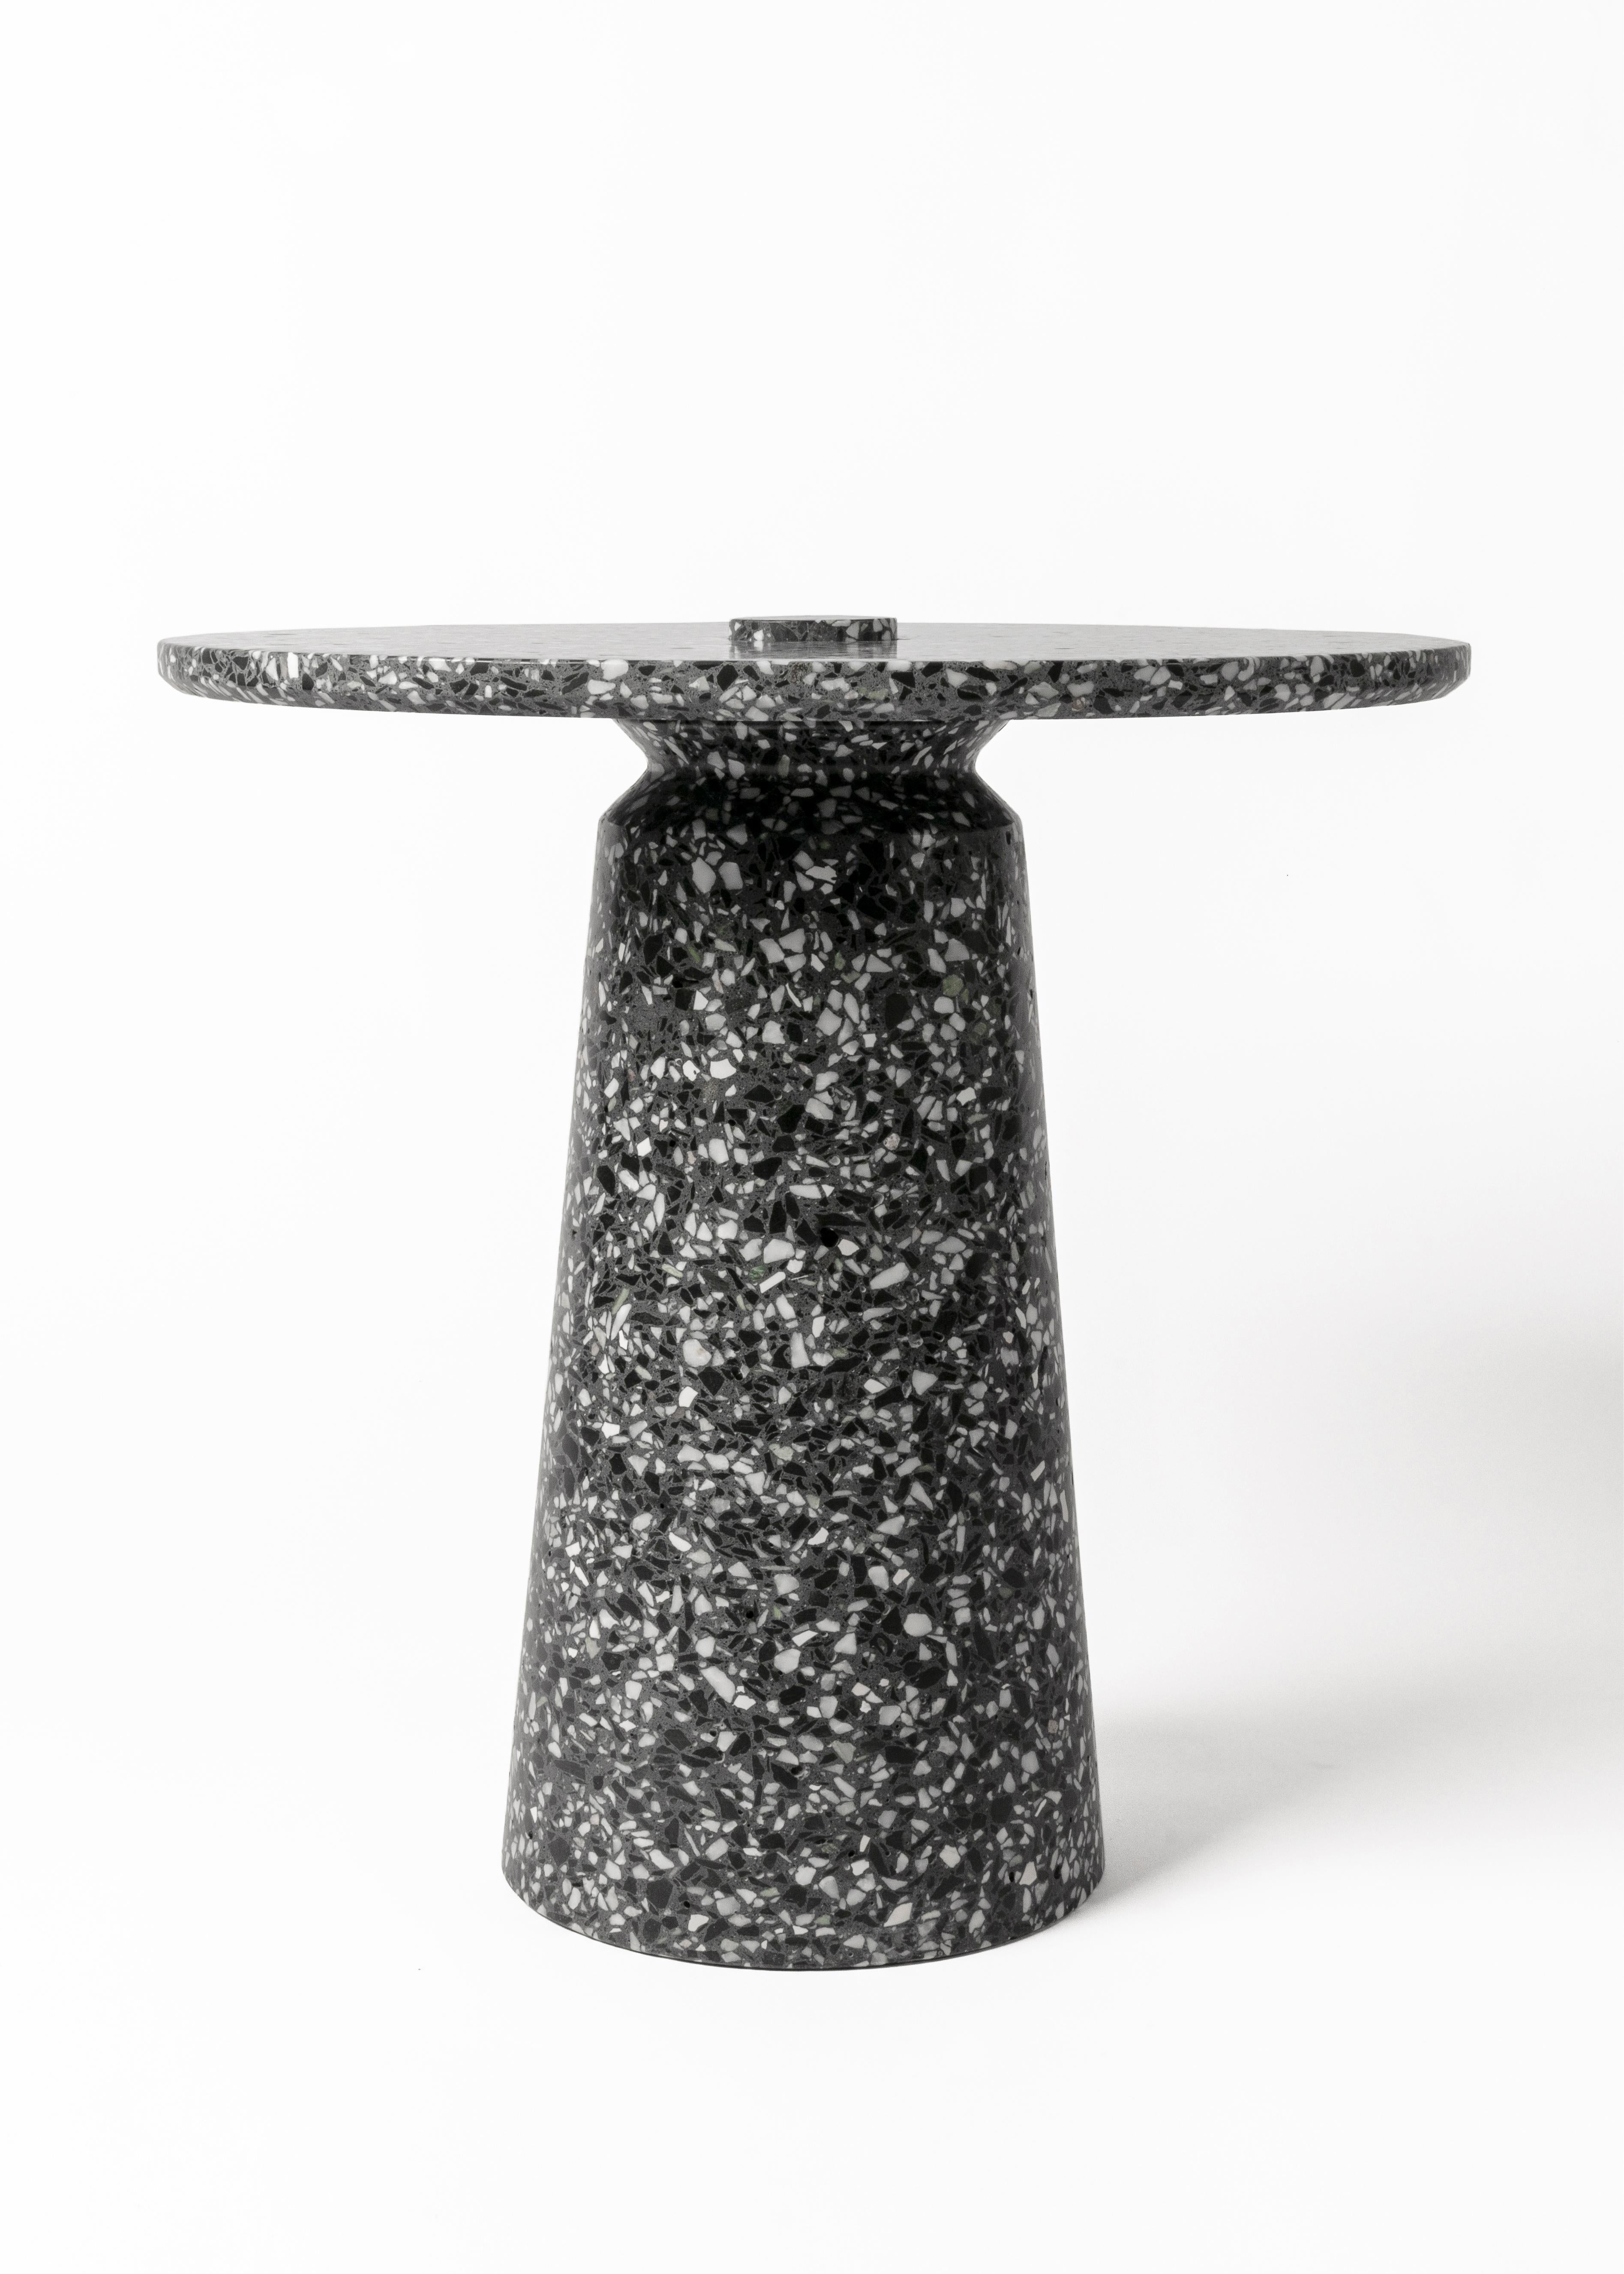 '8' side table in terrazzo (Black / white)

Measures: Ø 50 cm × H 50.3 cm

Bentu Design furniture and lightings derive its uniqueness from the simplicity of its forms and its materials. Designed and manufactured by the designers of Studio Bentu